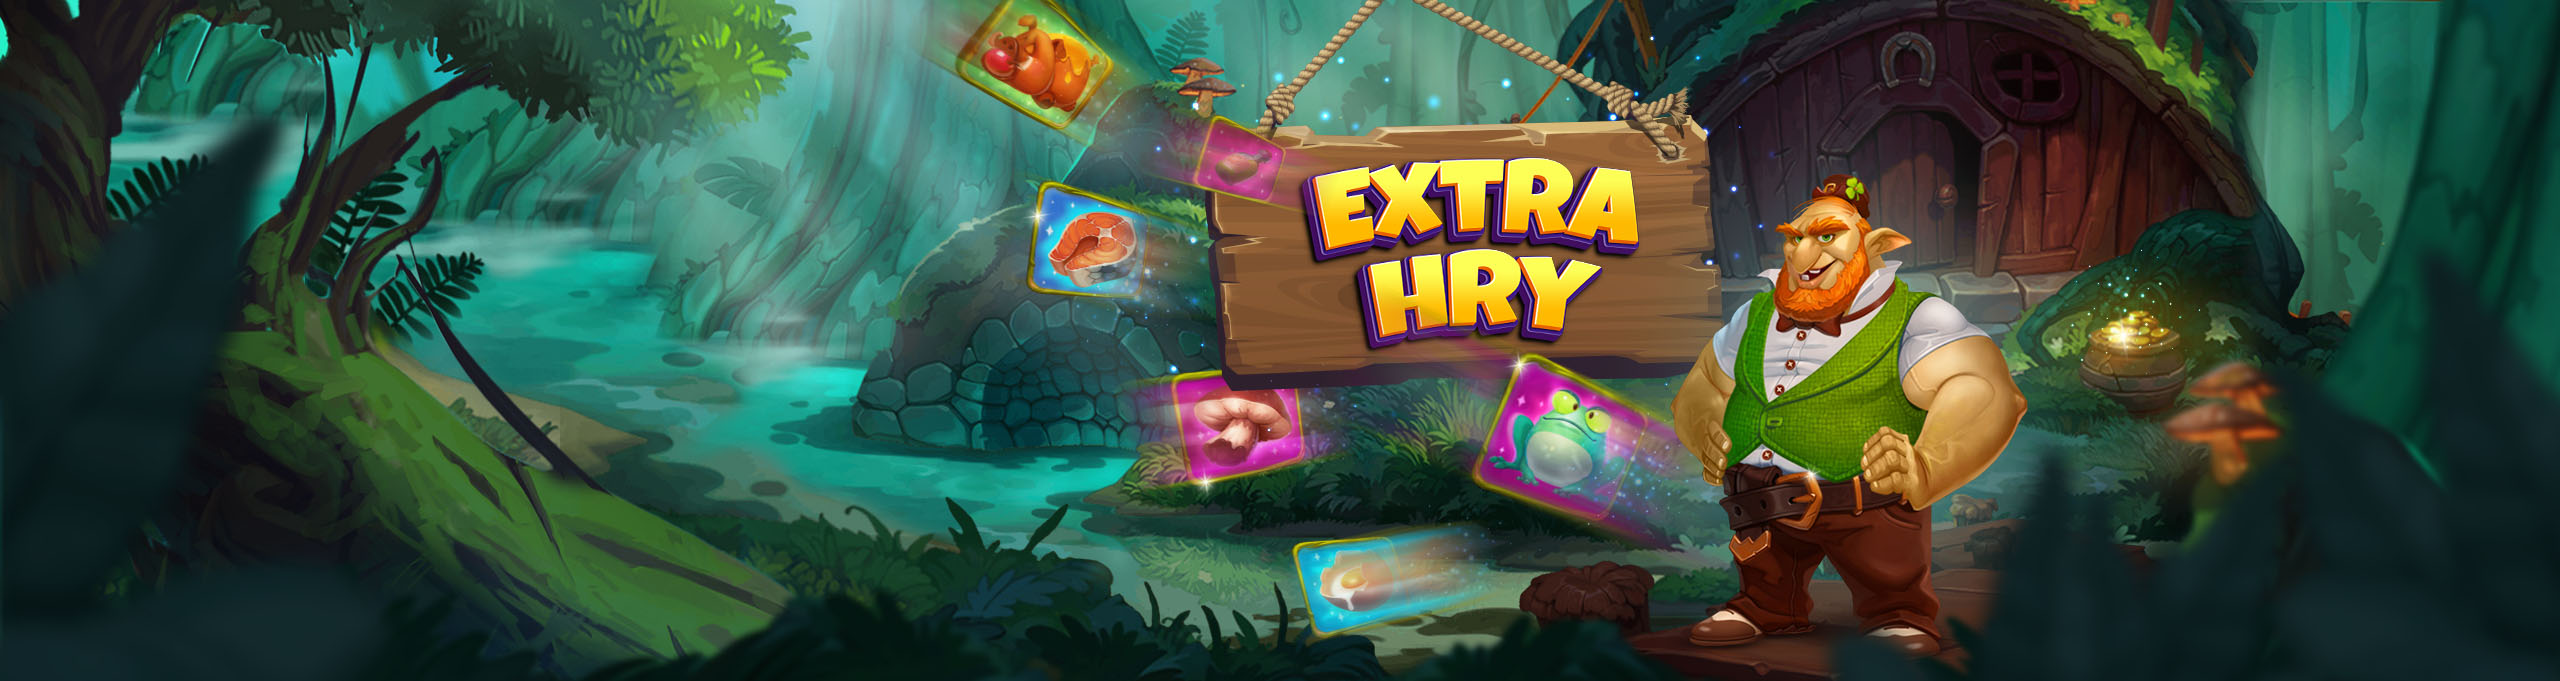 Extra hry